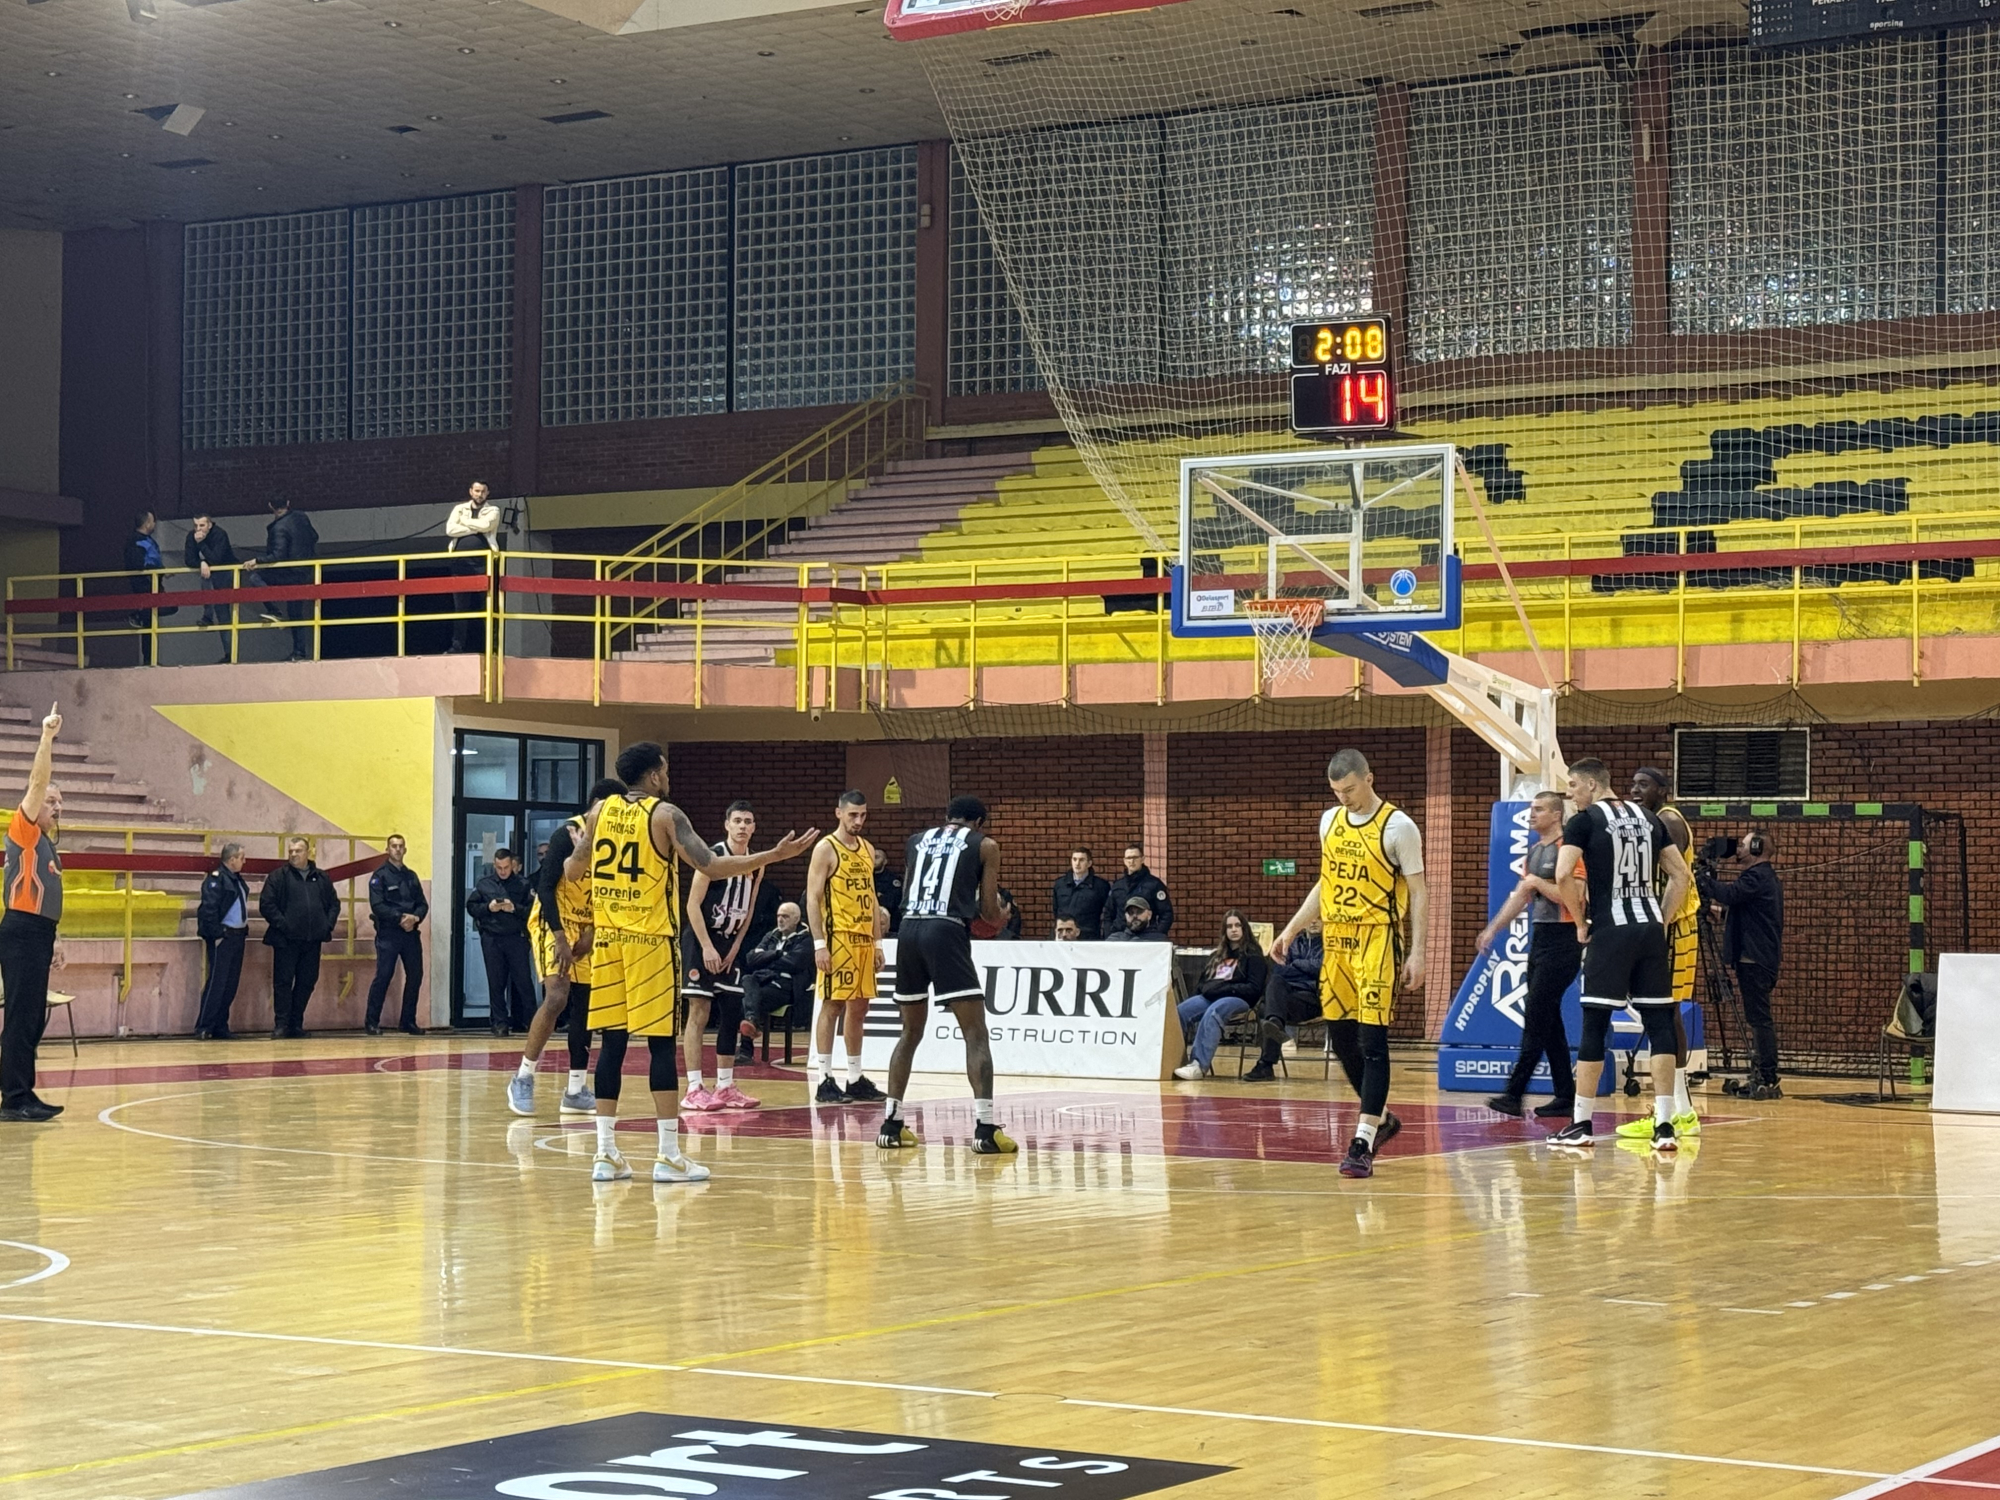 KB Peja catches up with AEL on top after a blowout win against KK Pljevlja